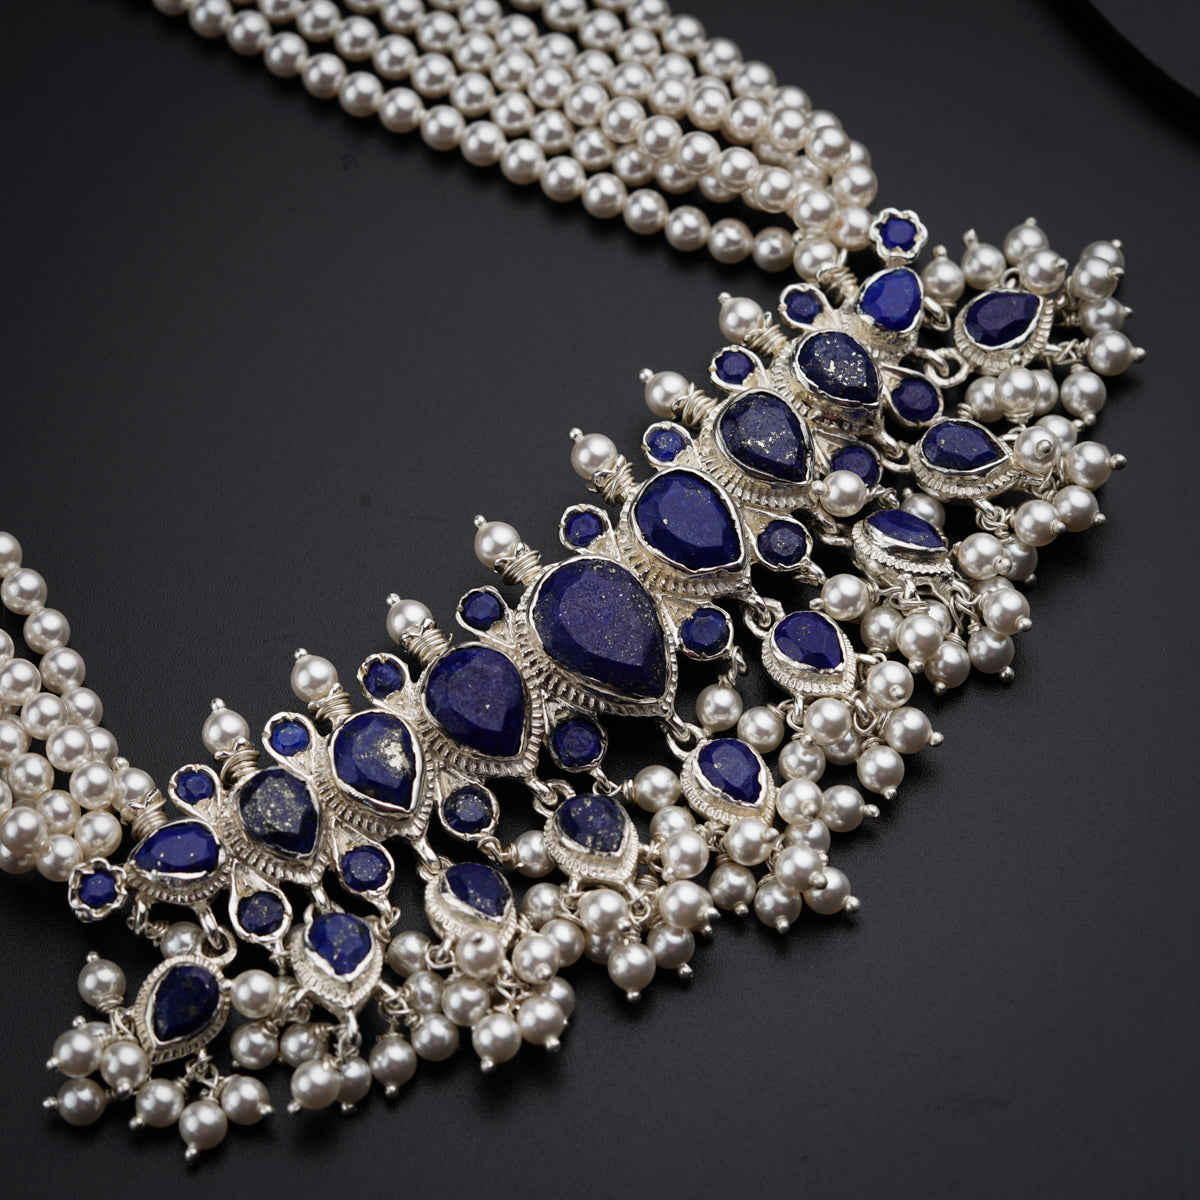 a necklace with blue stones and pearls on a black surface